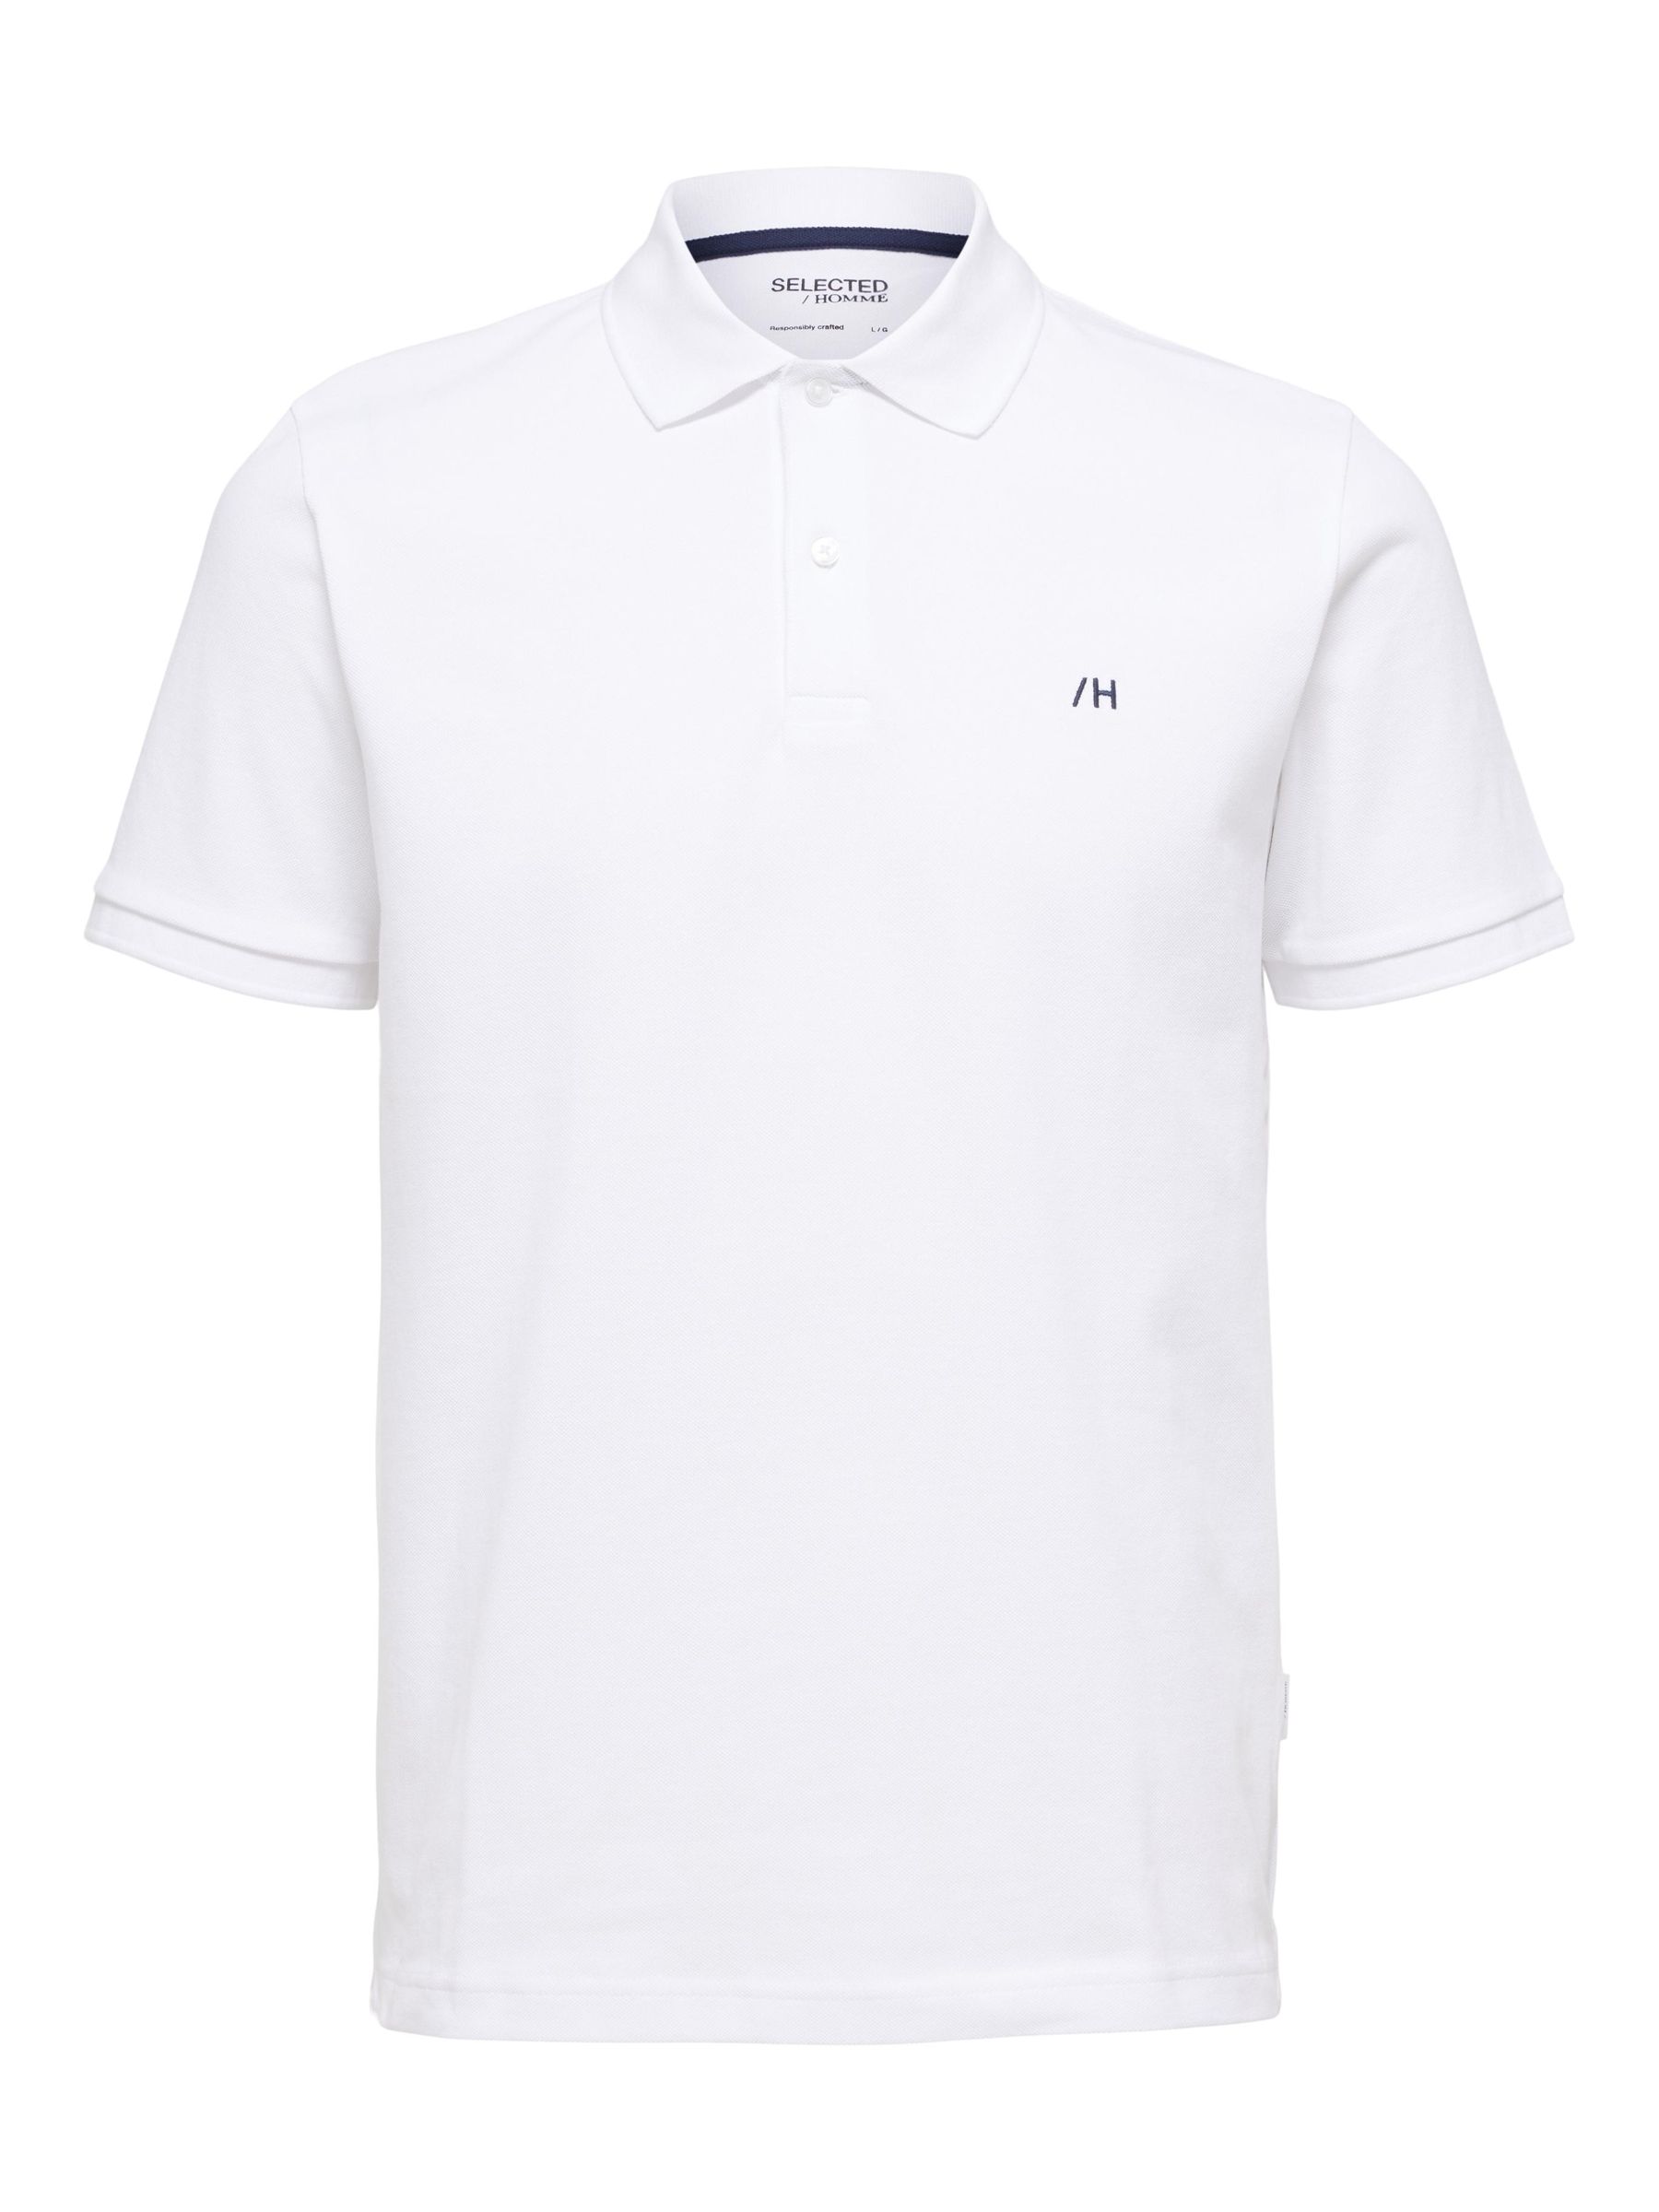 CLASSIC POLO SHIRT | White | SELECTED HOMME®